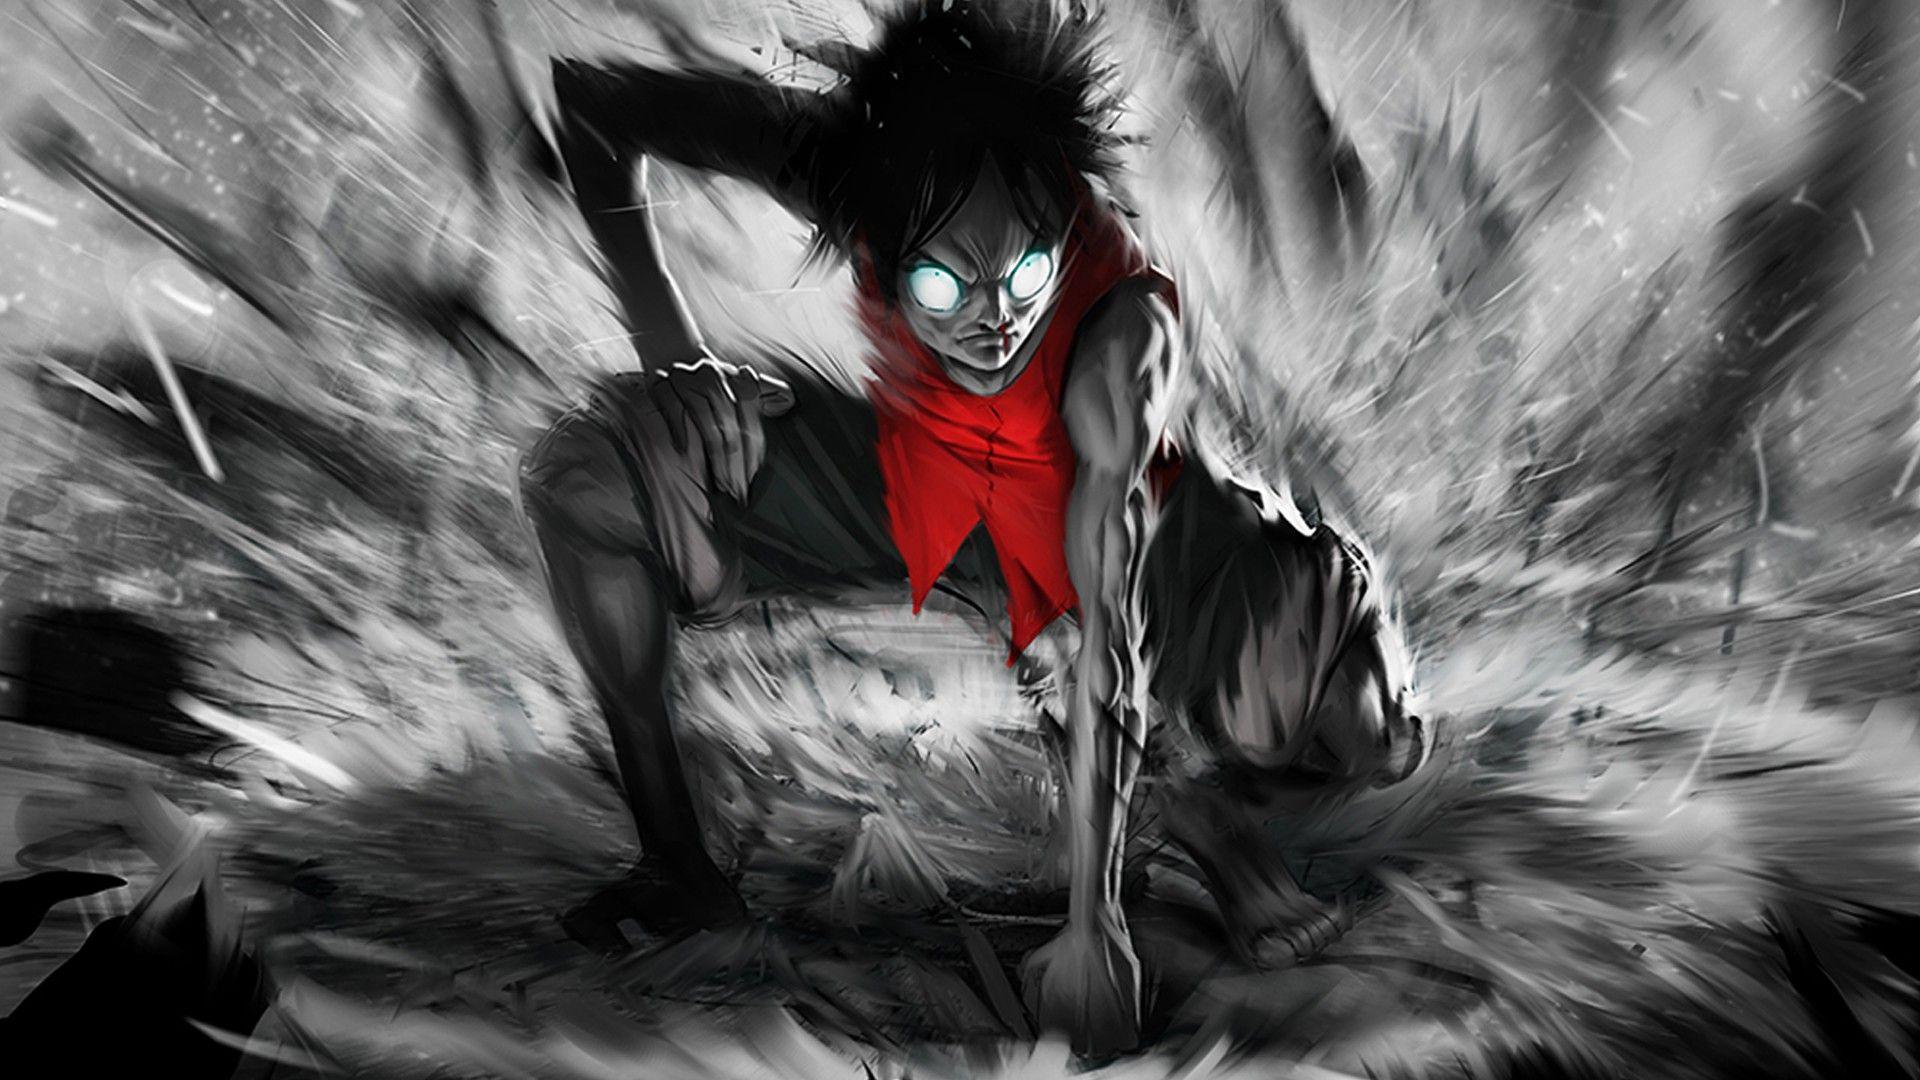 Wallpaper, anime, black hair, demon, One Piece, Monkey D Luffy, feather, darkness, 1920x1080 px, computer wallpaper, black and white, monochrome photography, fictional character, cg artwork, supernatural creature 1920x1080